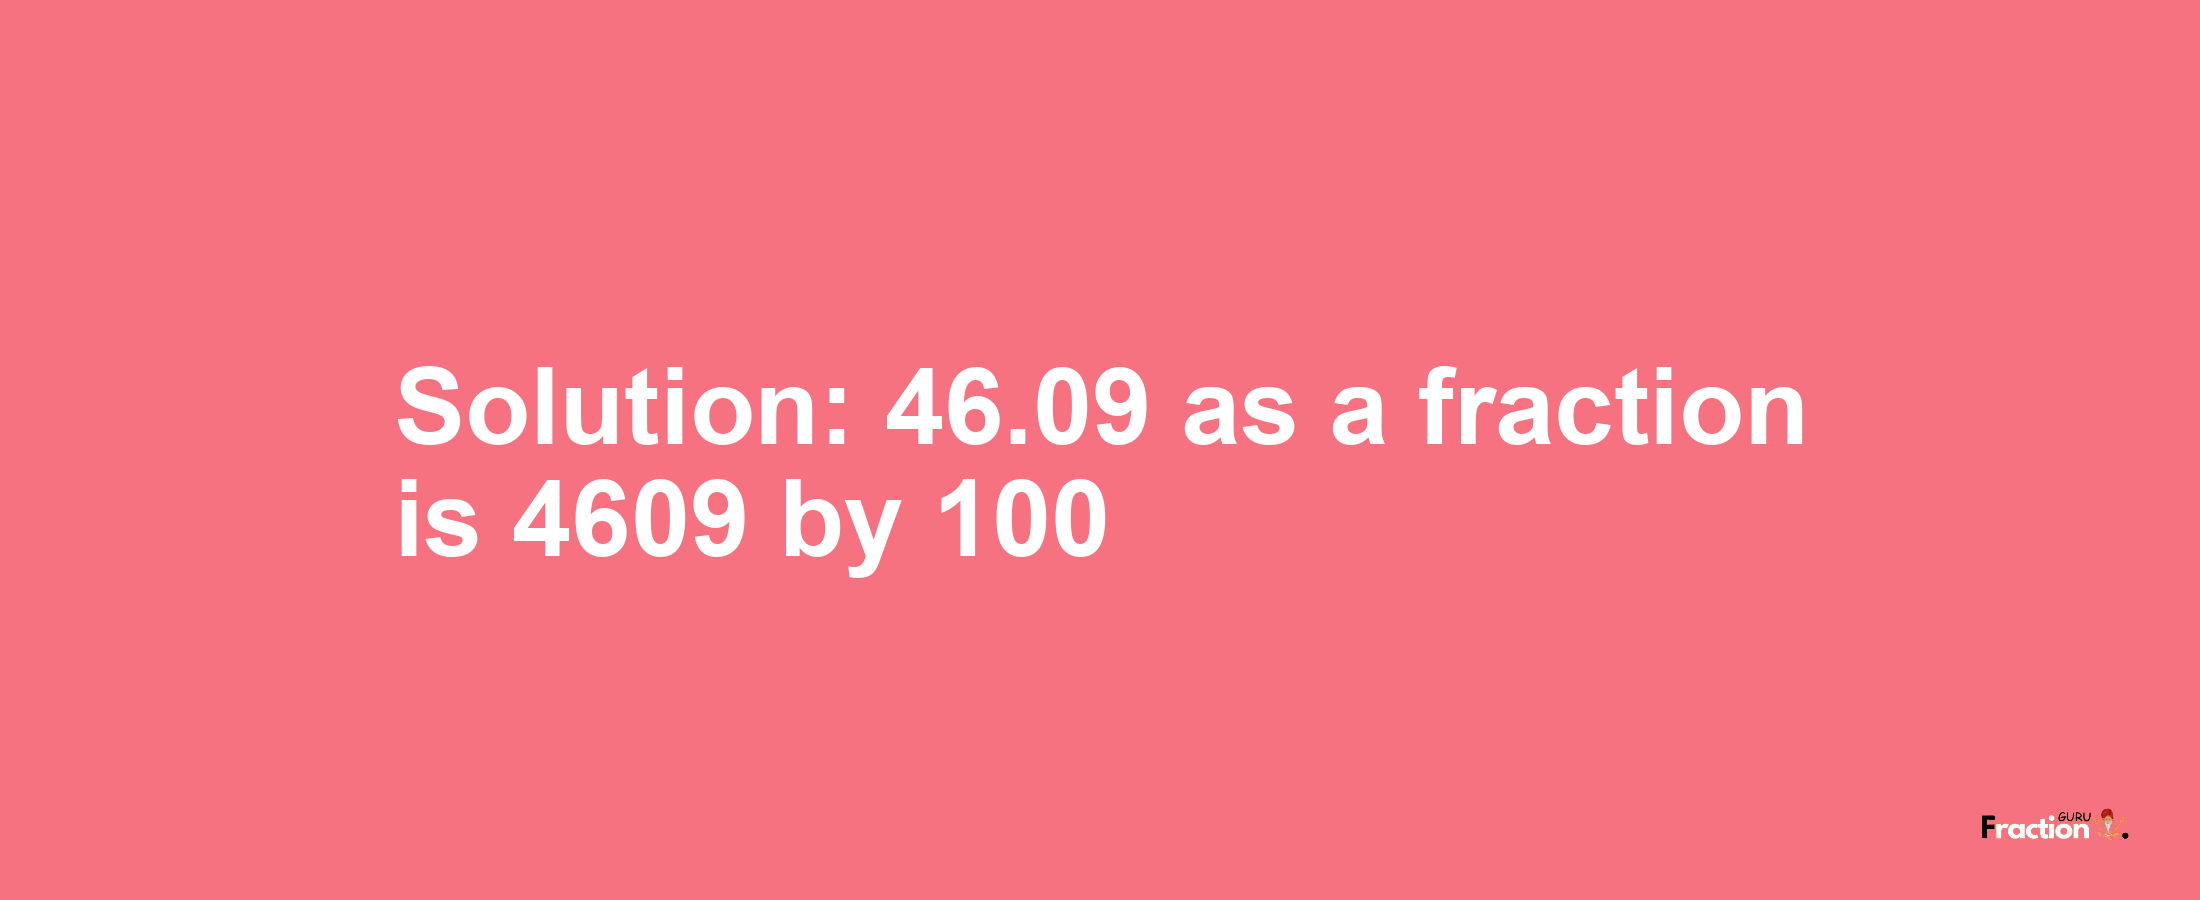 Solution:46.09 as a fraction is 4609/100